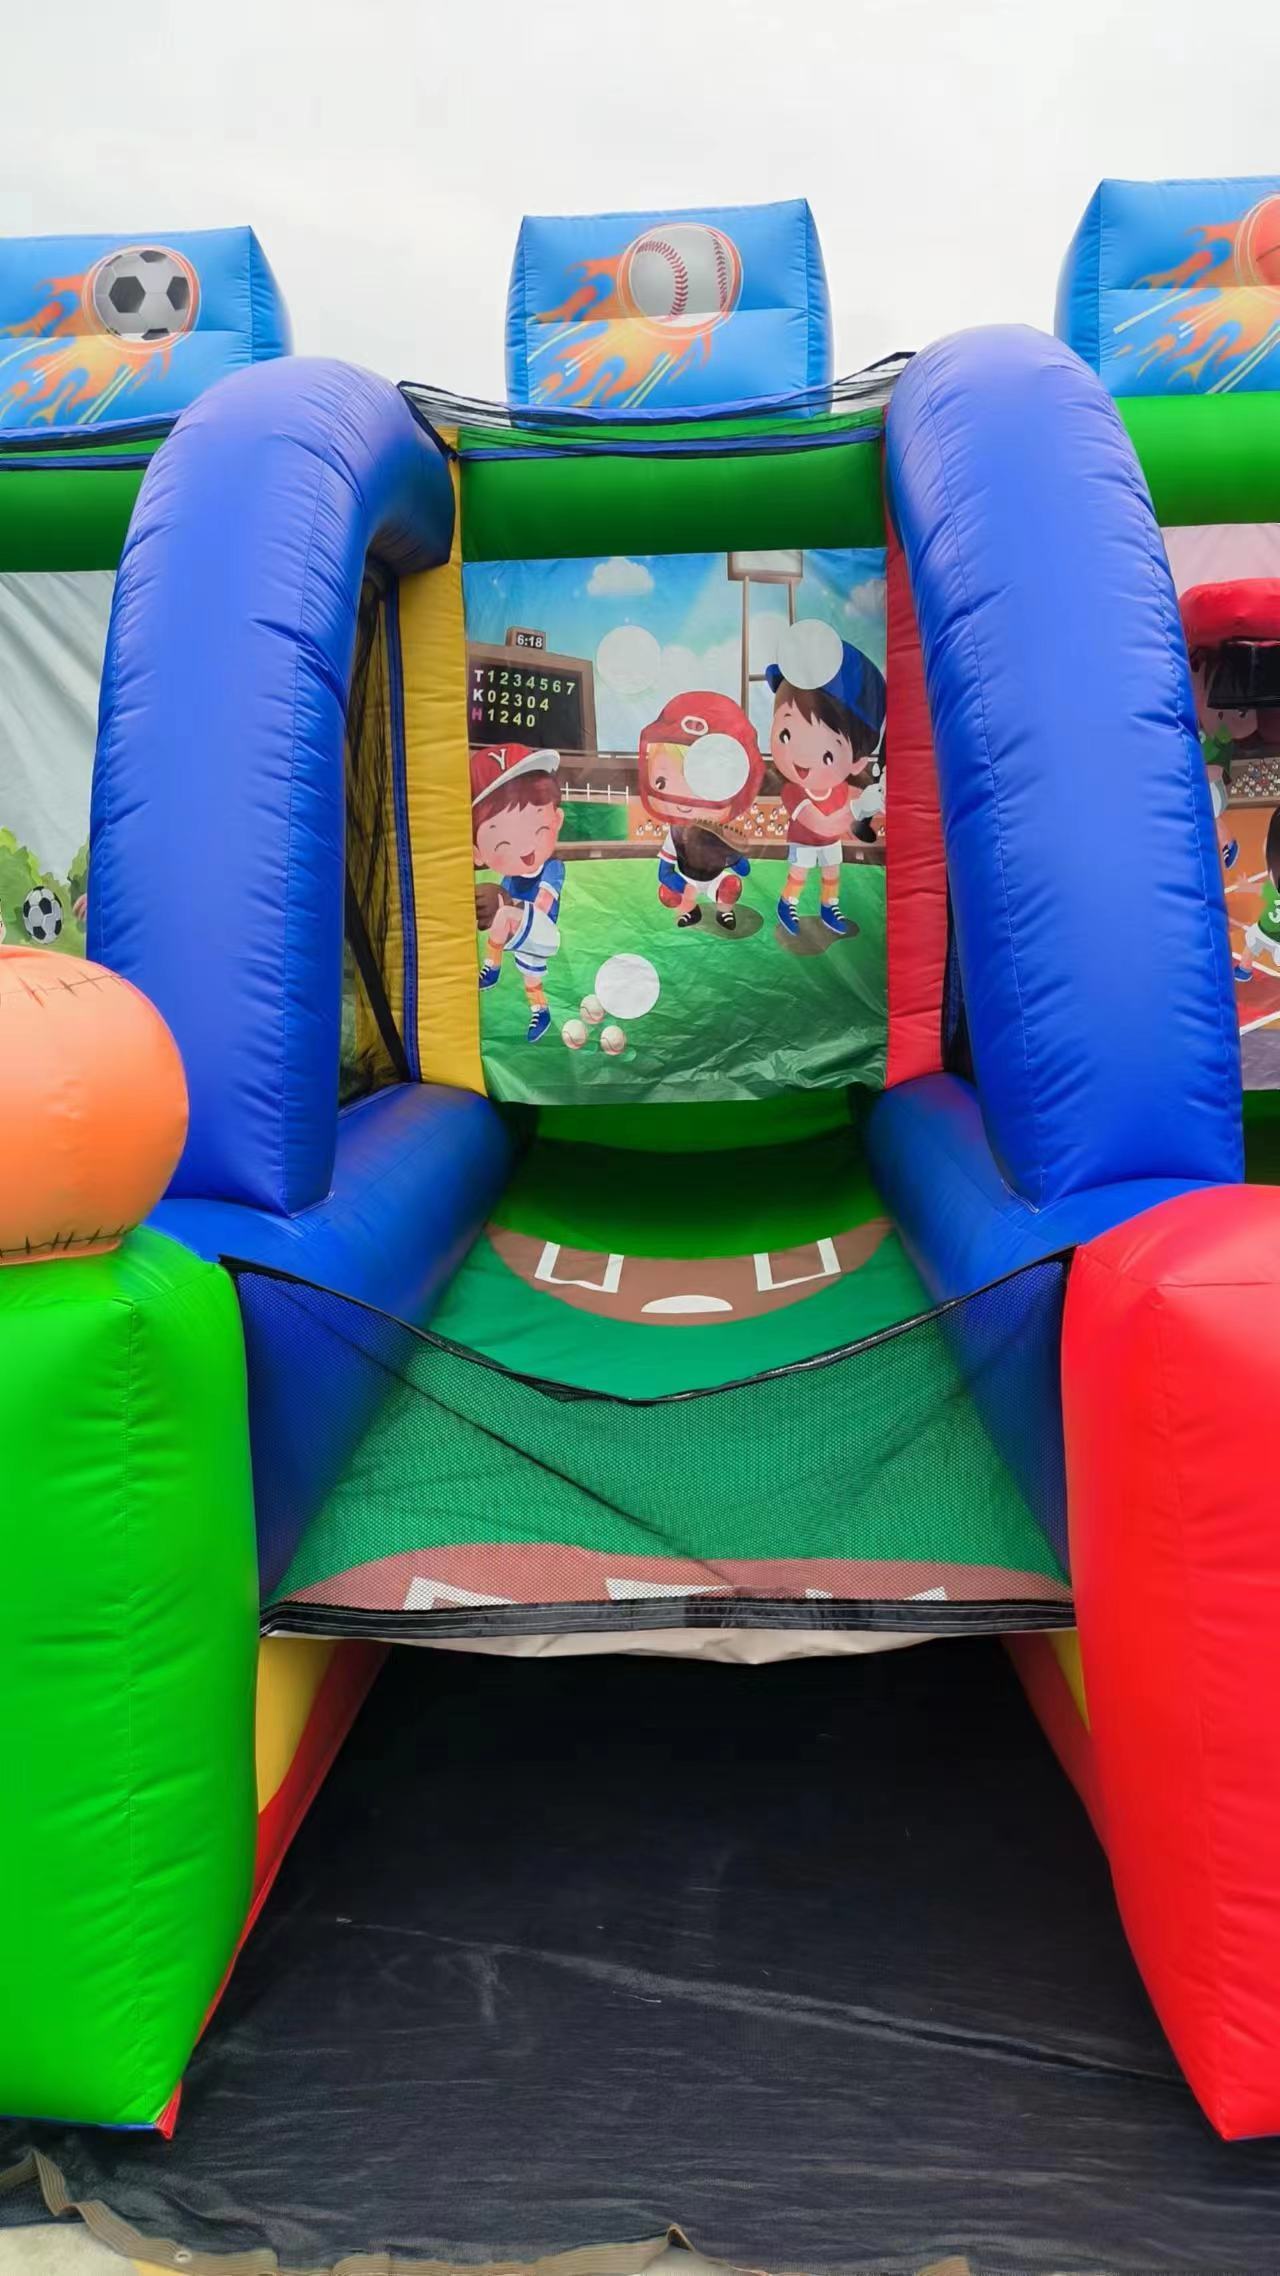 inflatable ball shooter  New models commercial large inflatable sport fun city park moonwalk inflatable ball shooter games amusement equipment bouncer latest obstacle bouncer foreign trade exports inflatable sport,inflatable ball shooter